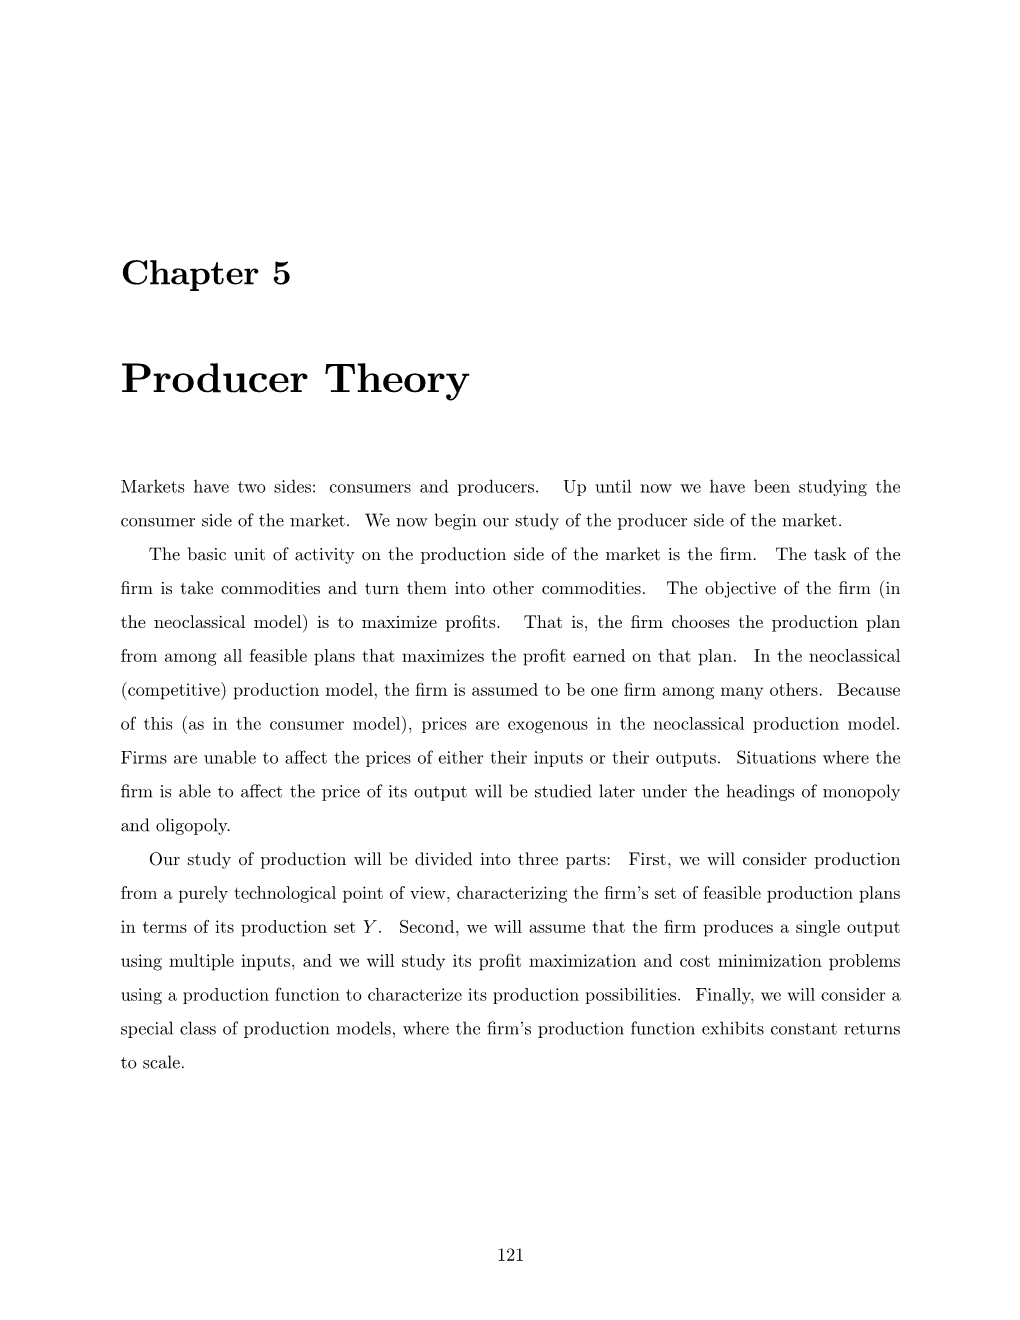 Chapter 5: Producer Theory